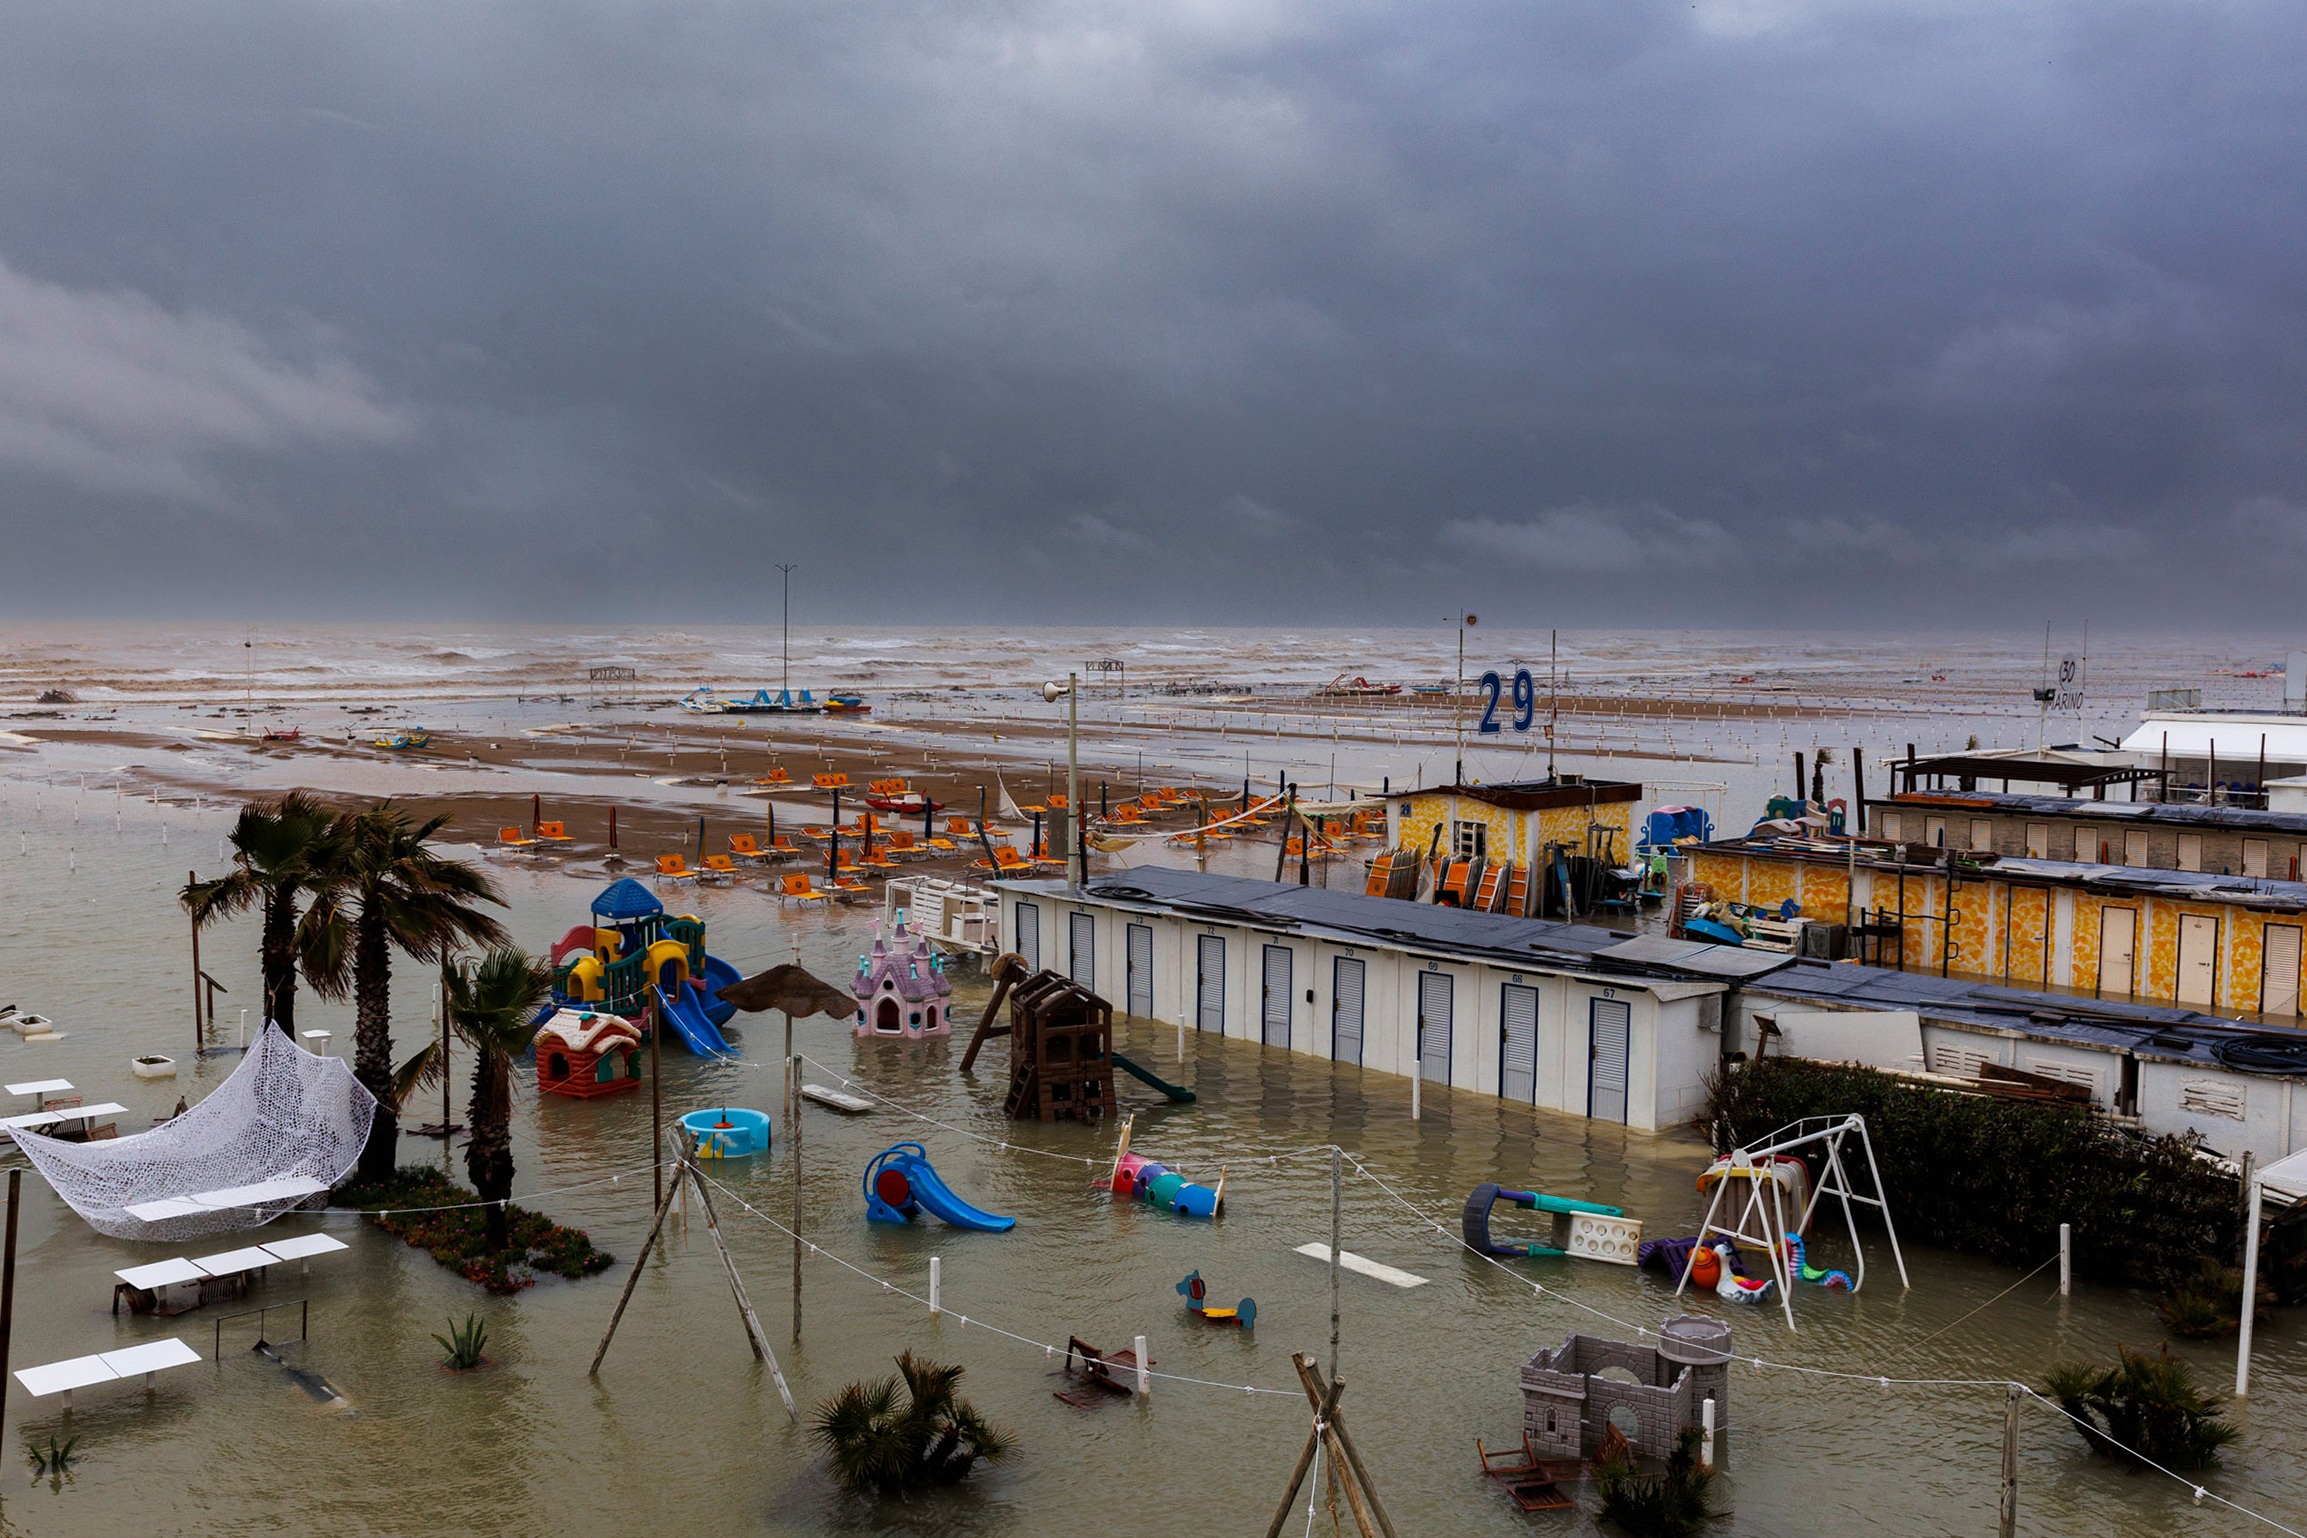 Damage and flooding in Rimini on May 17. (IPA/Sipa USA/Reuters)